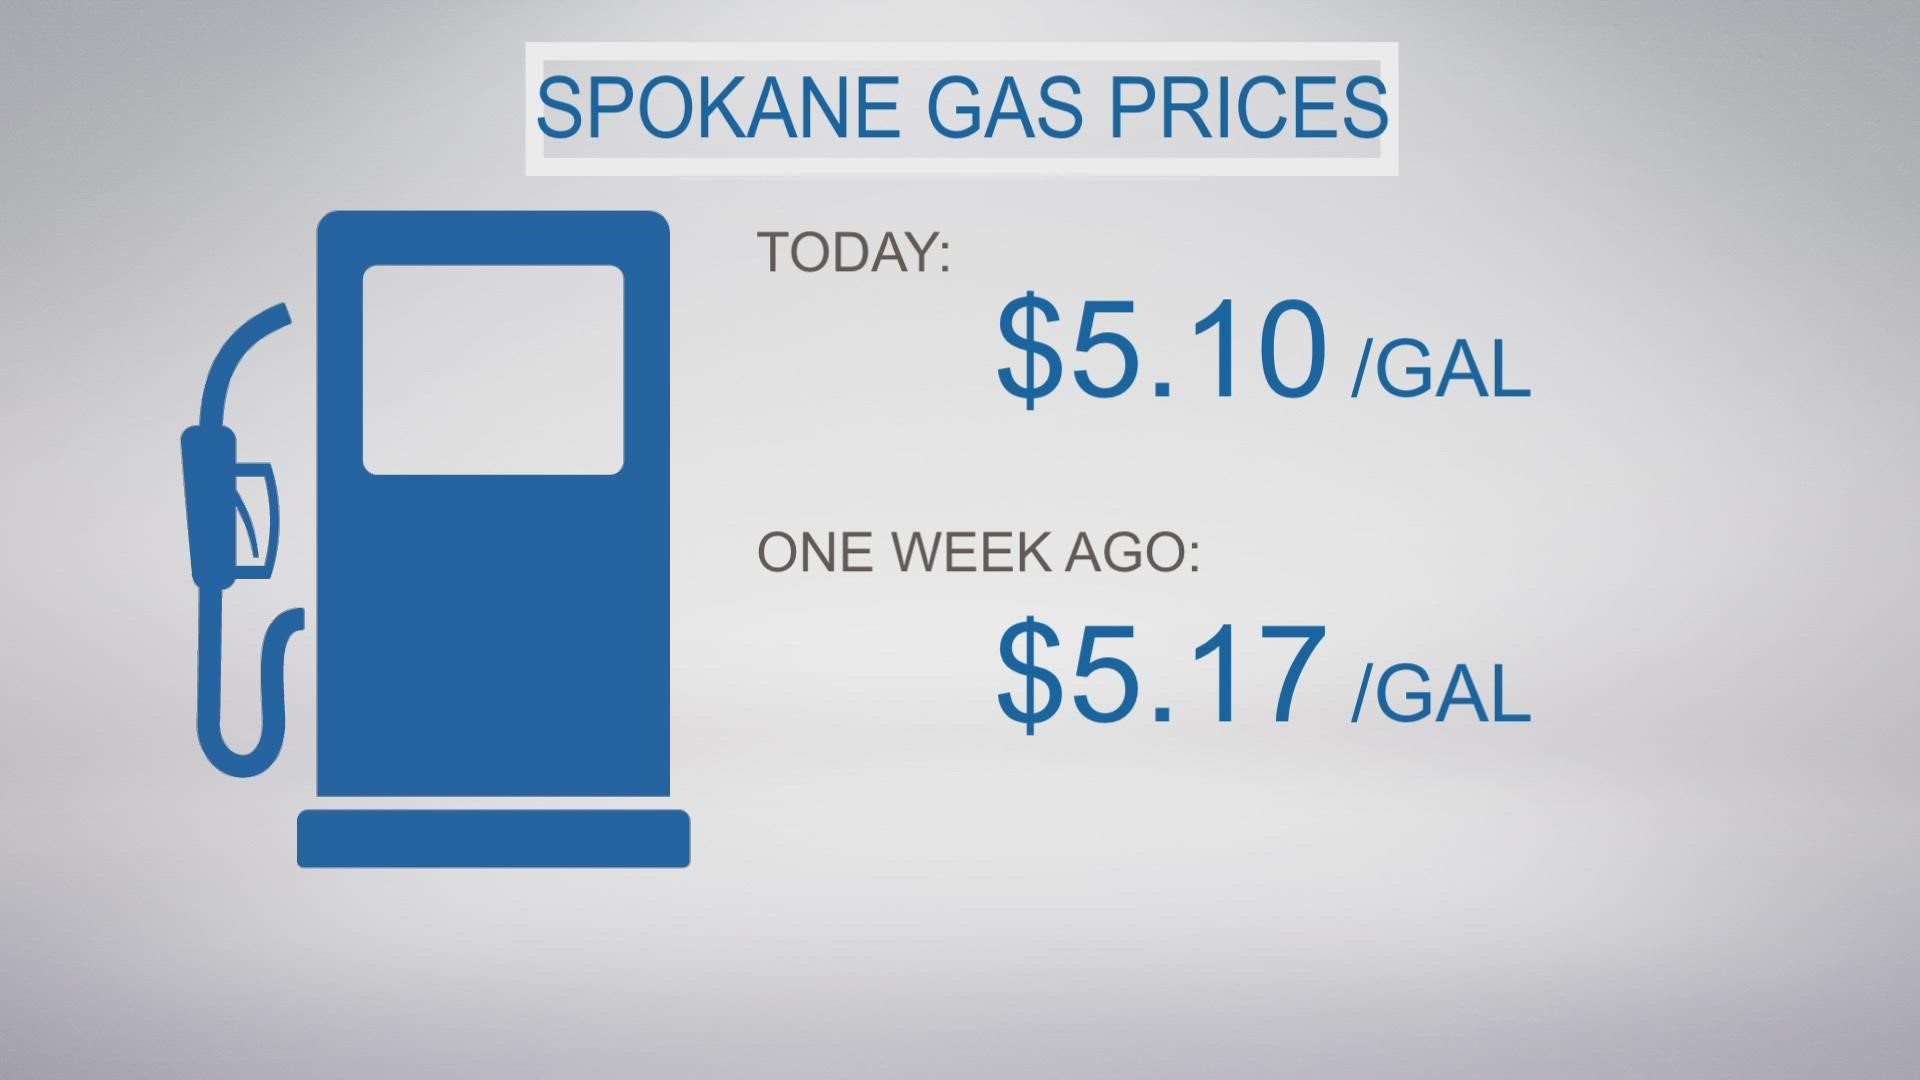 Washington's average gas price currently stands at $5.31 per gallon, down 10 cents from last week, according to GasBuddy.